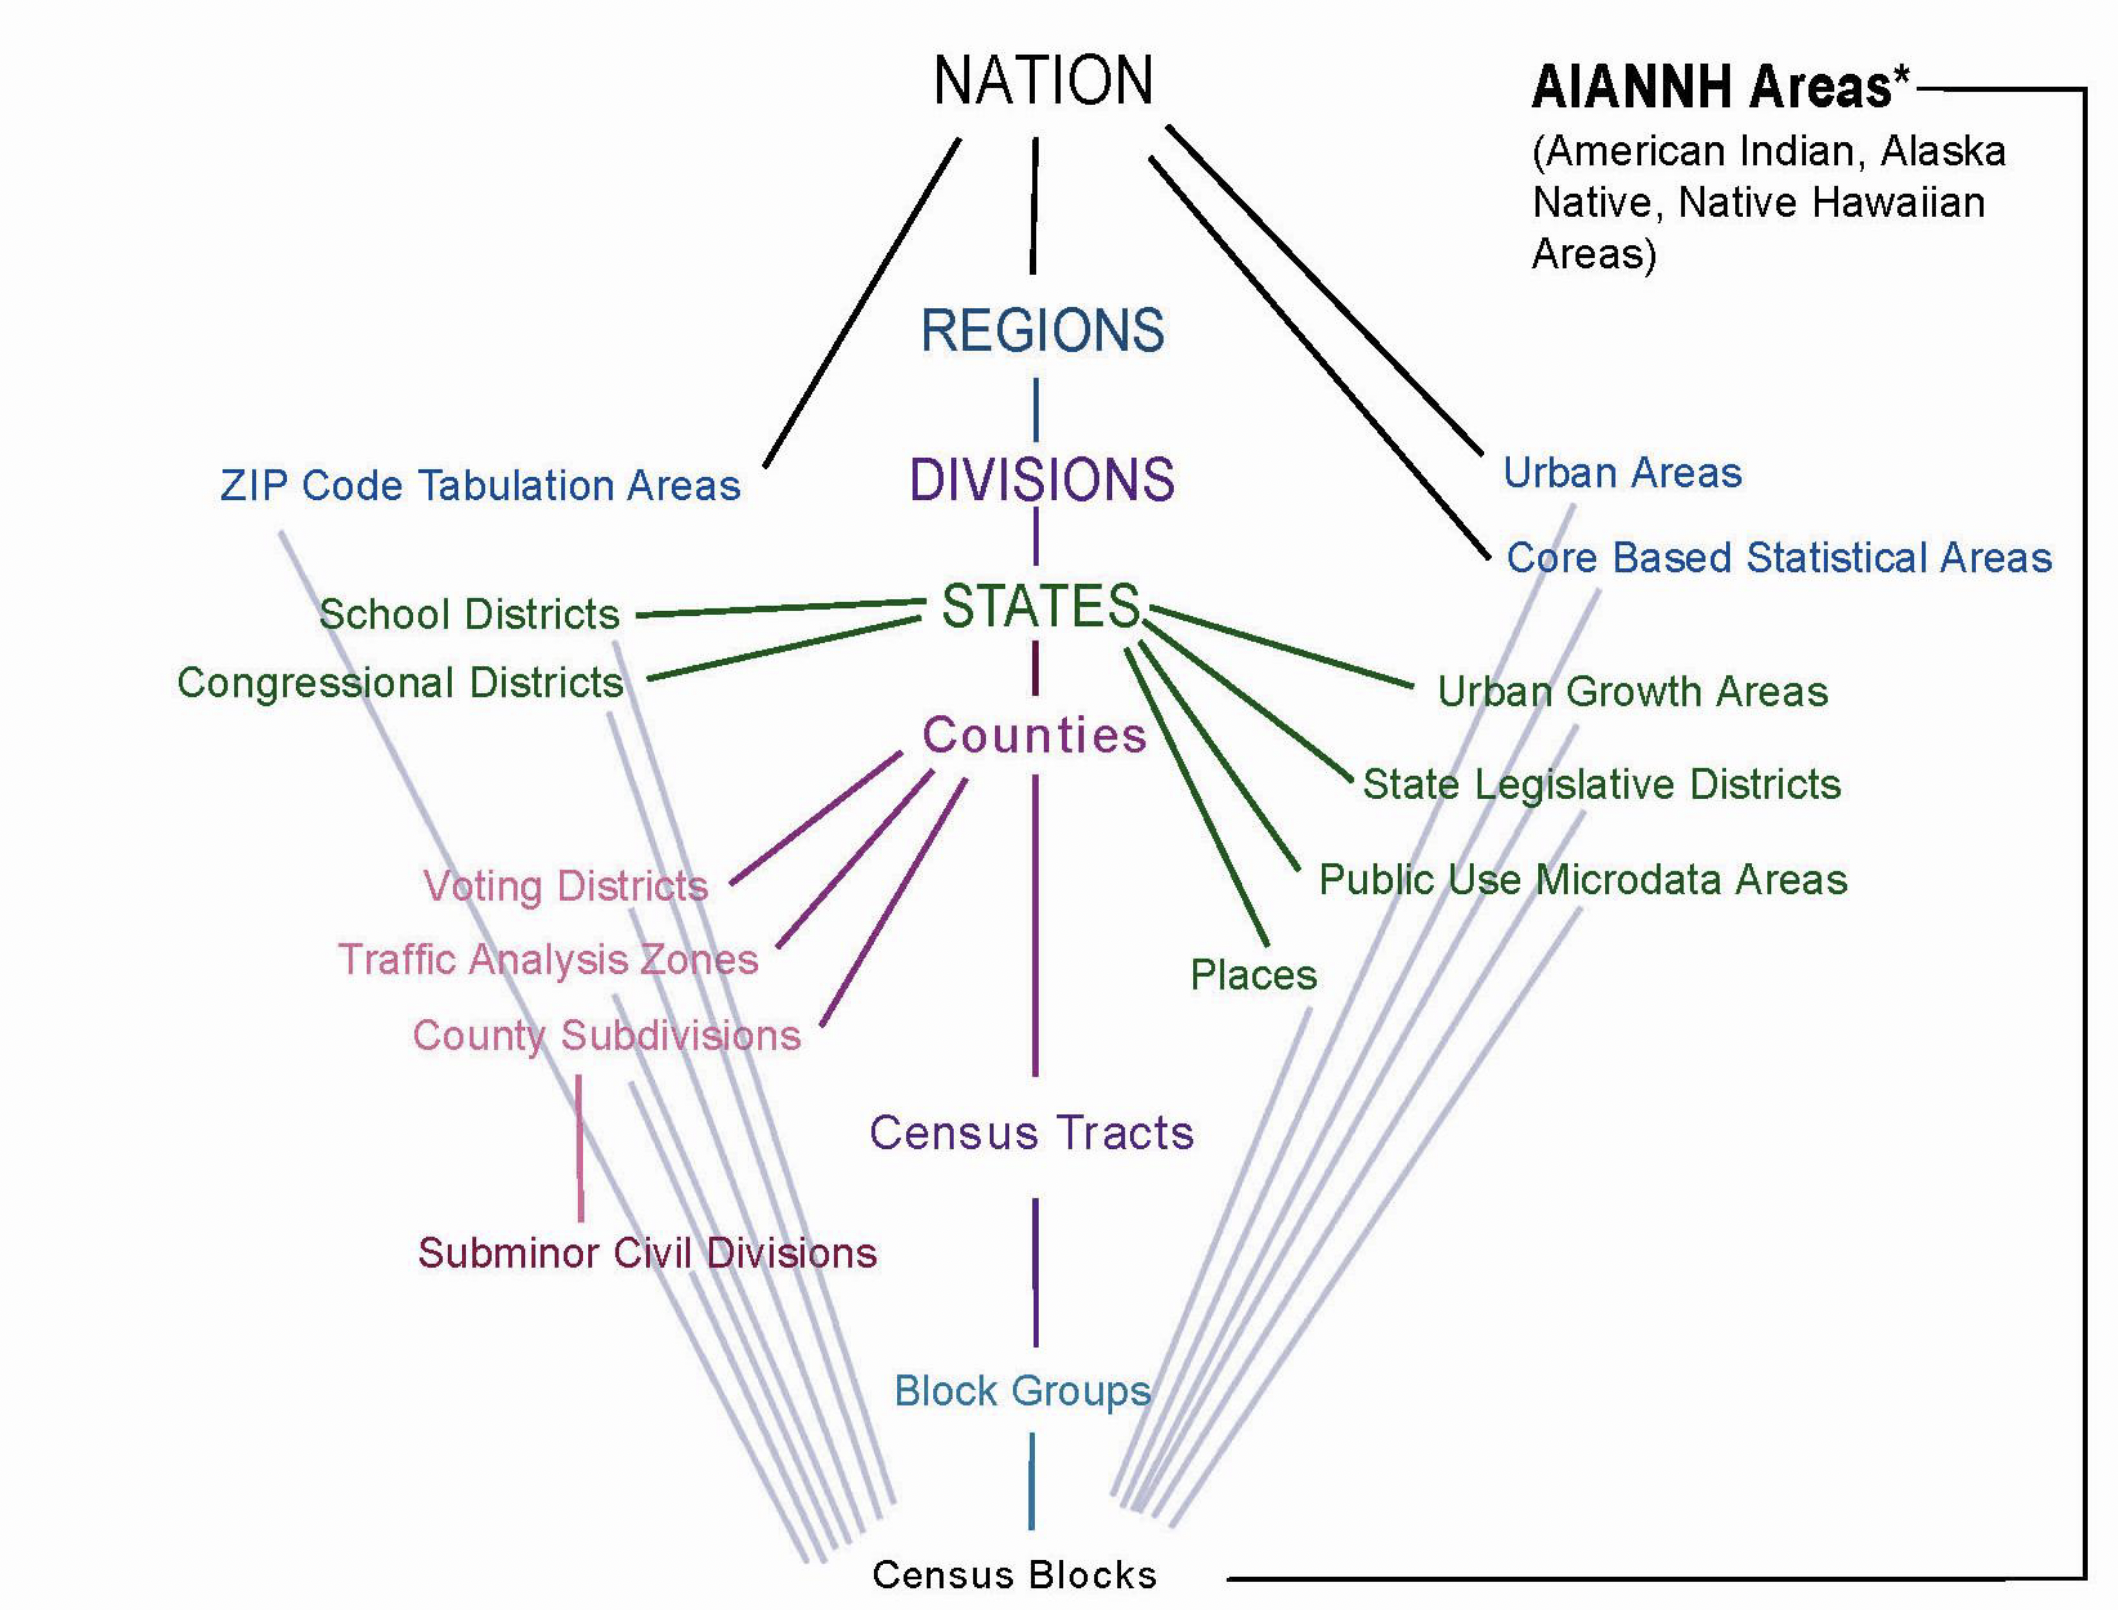 Hierarchy of geographic units as assignged by the US Census Bureau. Reproduced from https://www.census.gov/content/dam/Census/data/developers/geoareaconcepts.pdf